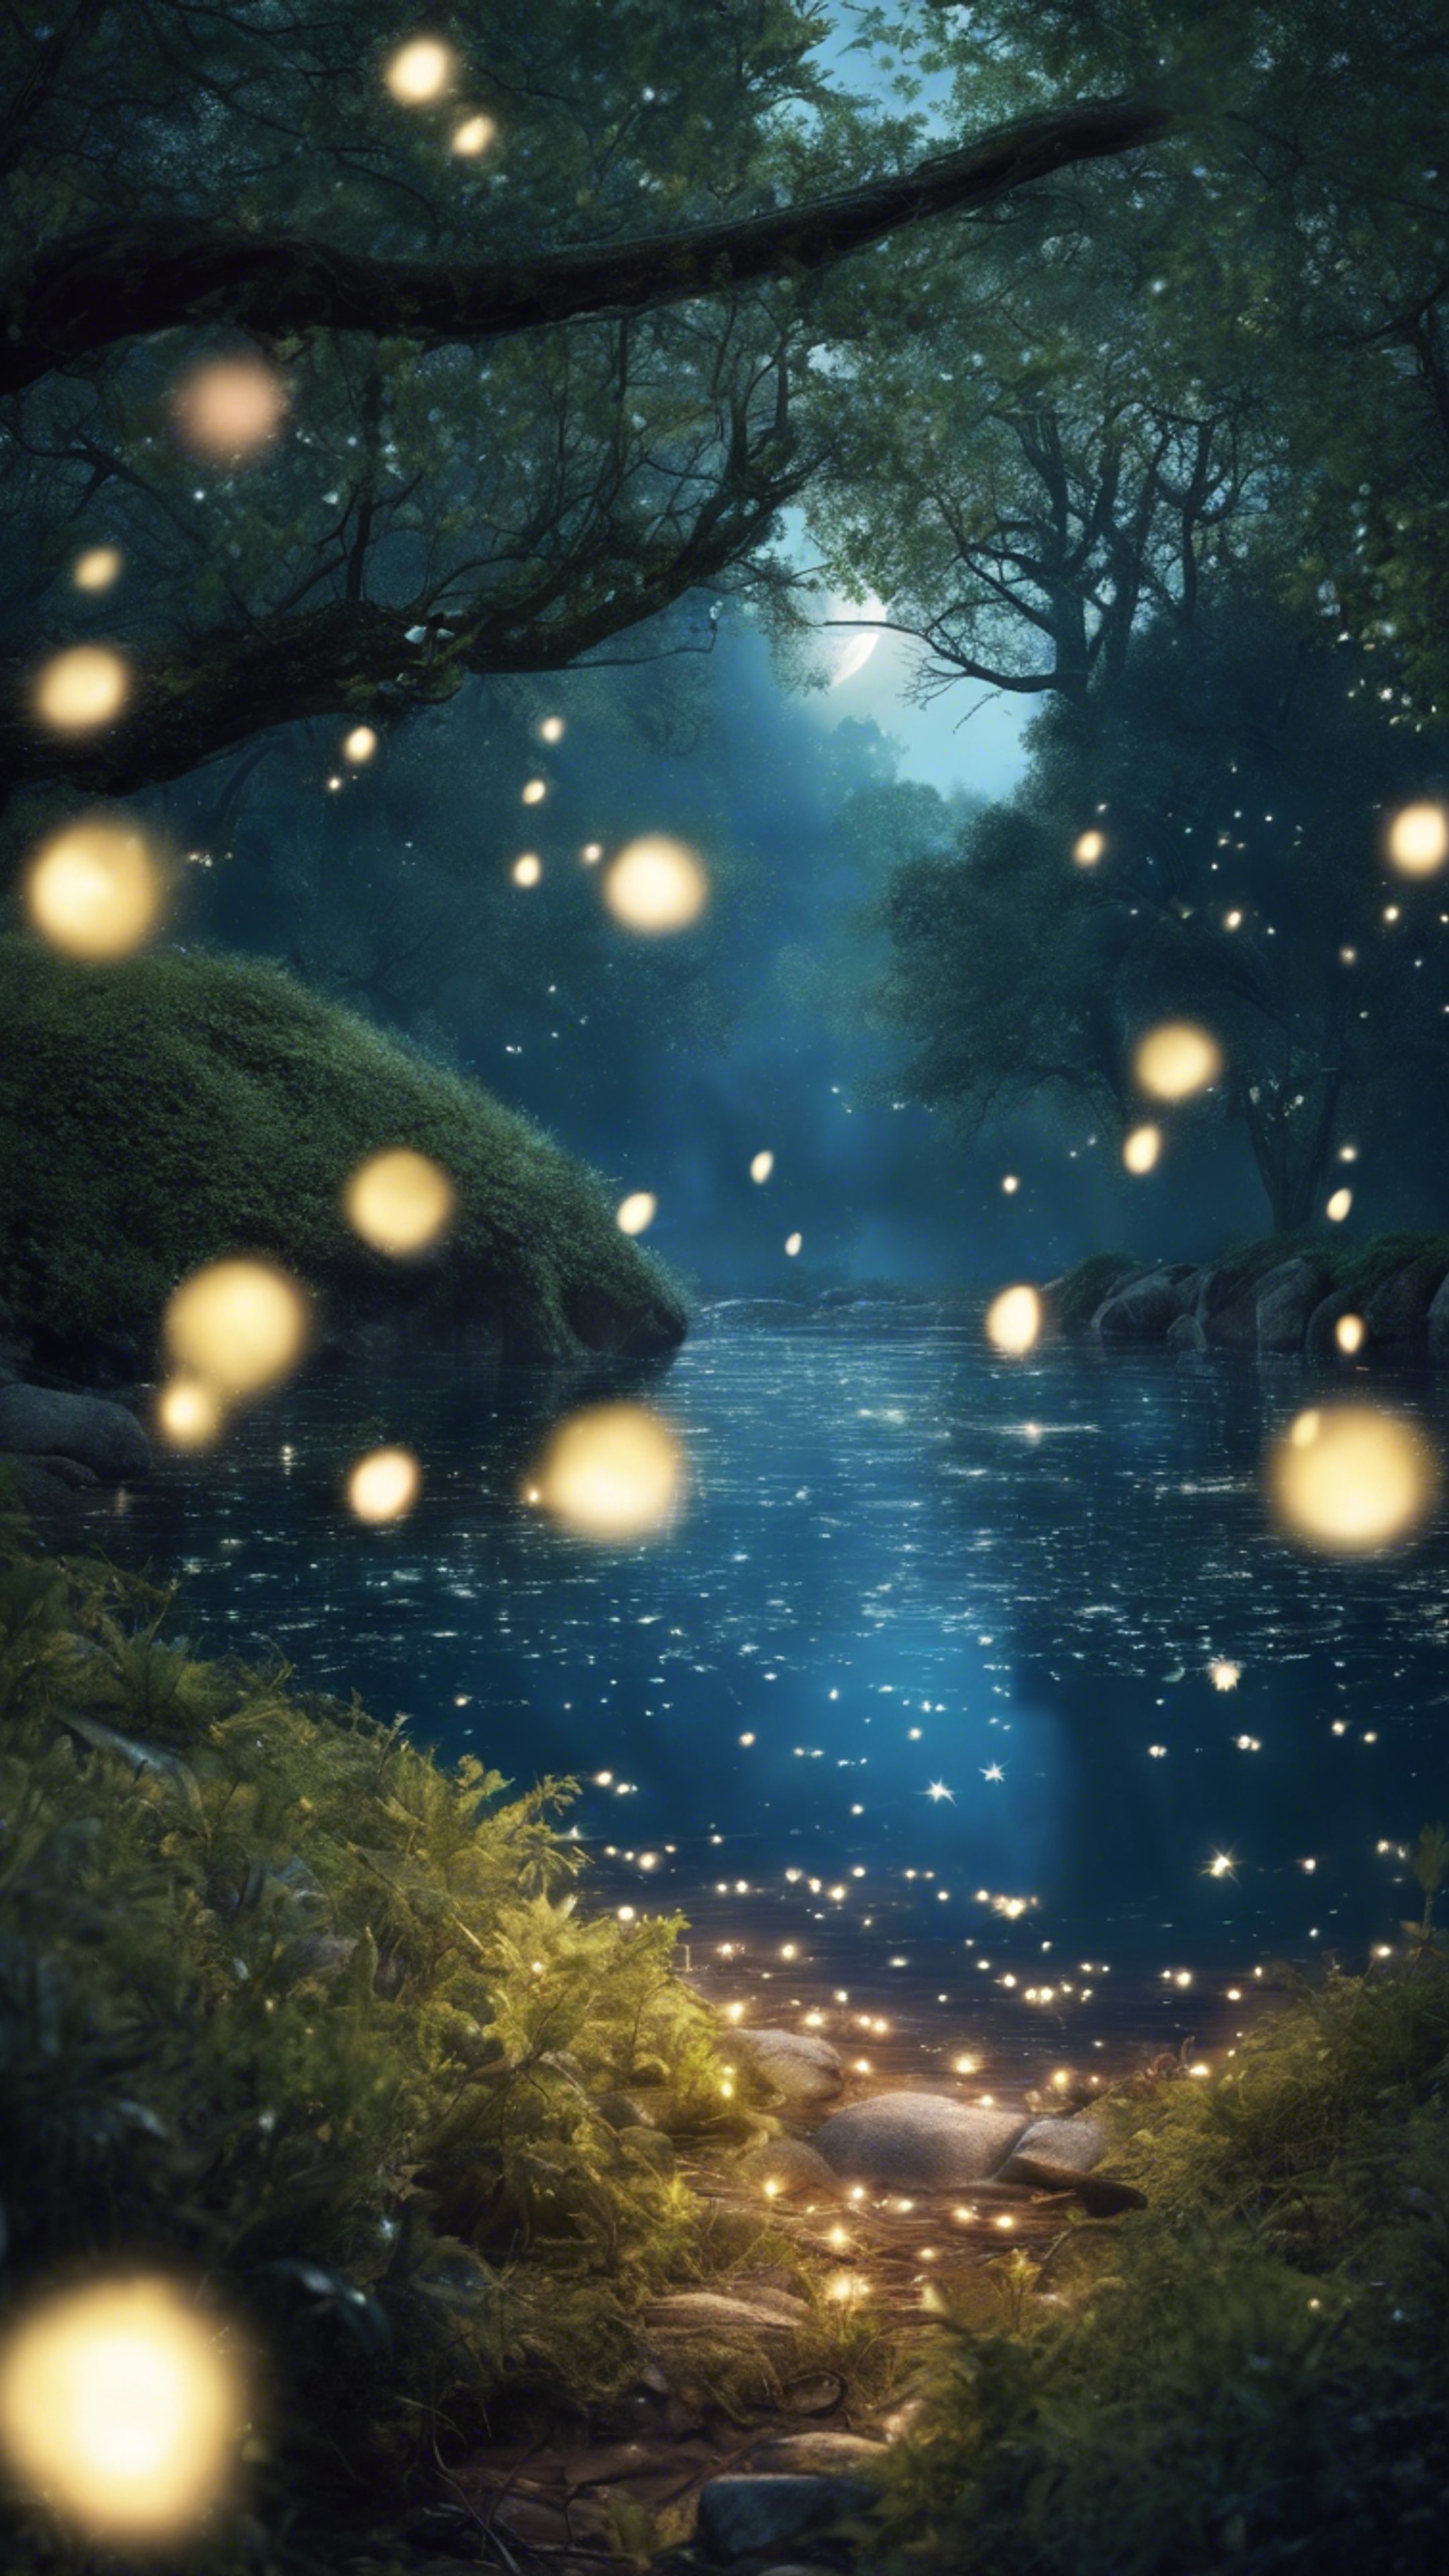 An enchanted forest lit up by midnight blue fireflies, with a river gleaming under the silver moon. Sfondo[9c93675377644e8e8e21]